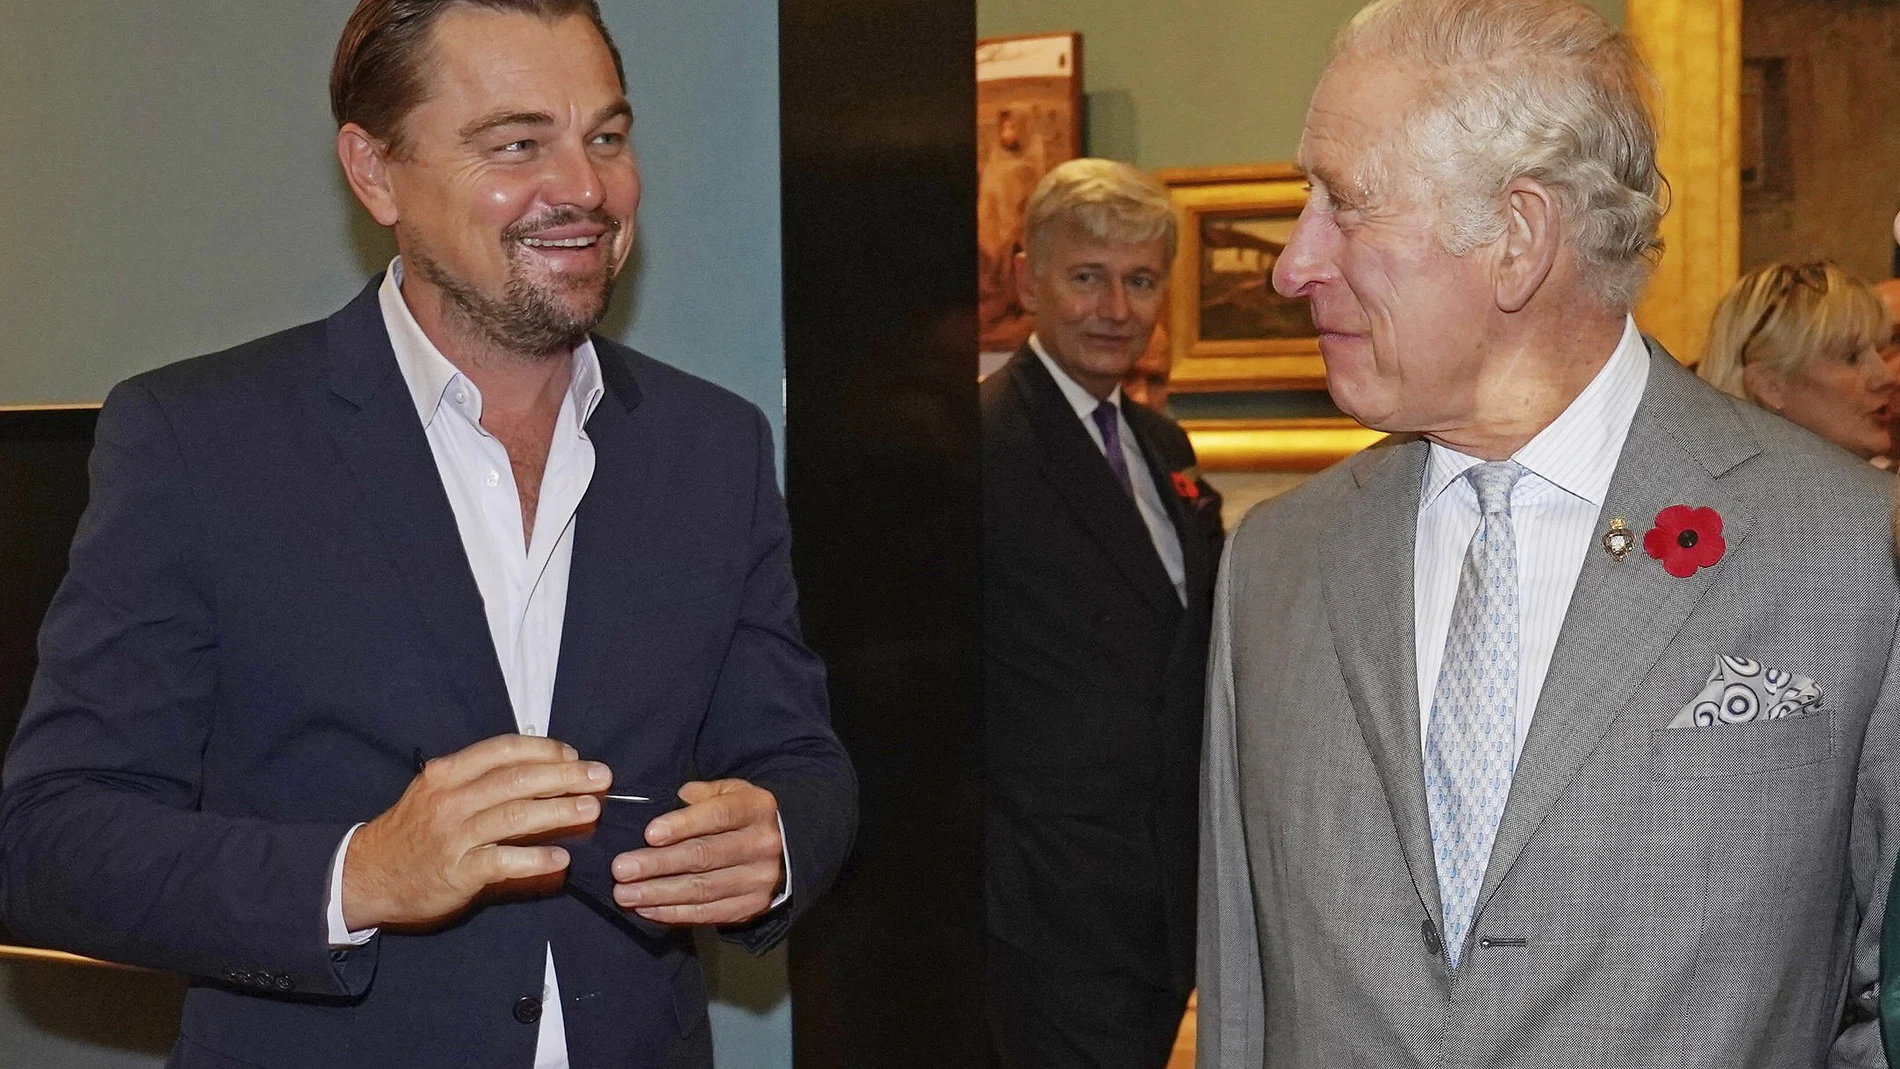 Britain's Prince Charles, right, speaks with Leonardo DiCaprio, left, as he views a fashion installation at the Kelvingrove Art Gallery and Museum, during the Cop26 summit being held at the Scottish Event Campus (SEC) in Glasgow, Scotland, Wednesday, Nov. 3, 2021. (Owen Humphreys/Pool via AP)